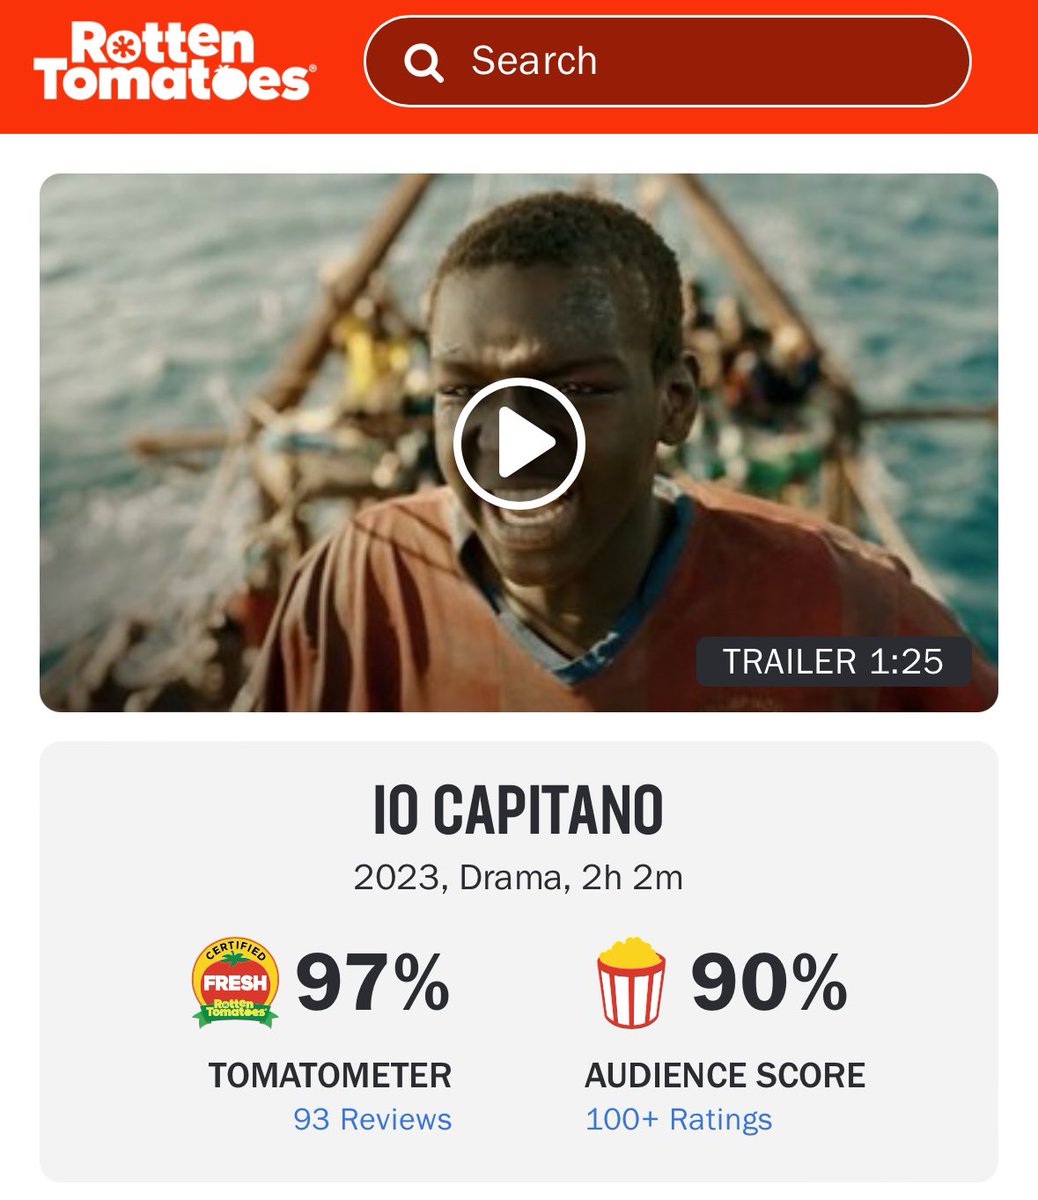 Matteo Garrone’s Oscar-nominated ‘IO CAPITANO’ starring Seydou Sarr is certified fresh on Rotten Tomatoes with a score of 97%. Now playing in UK and Irish cinemas.